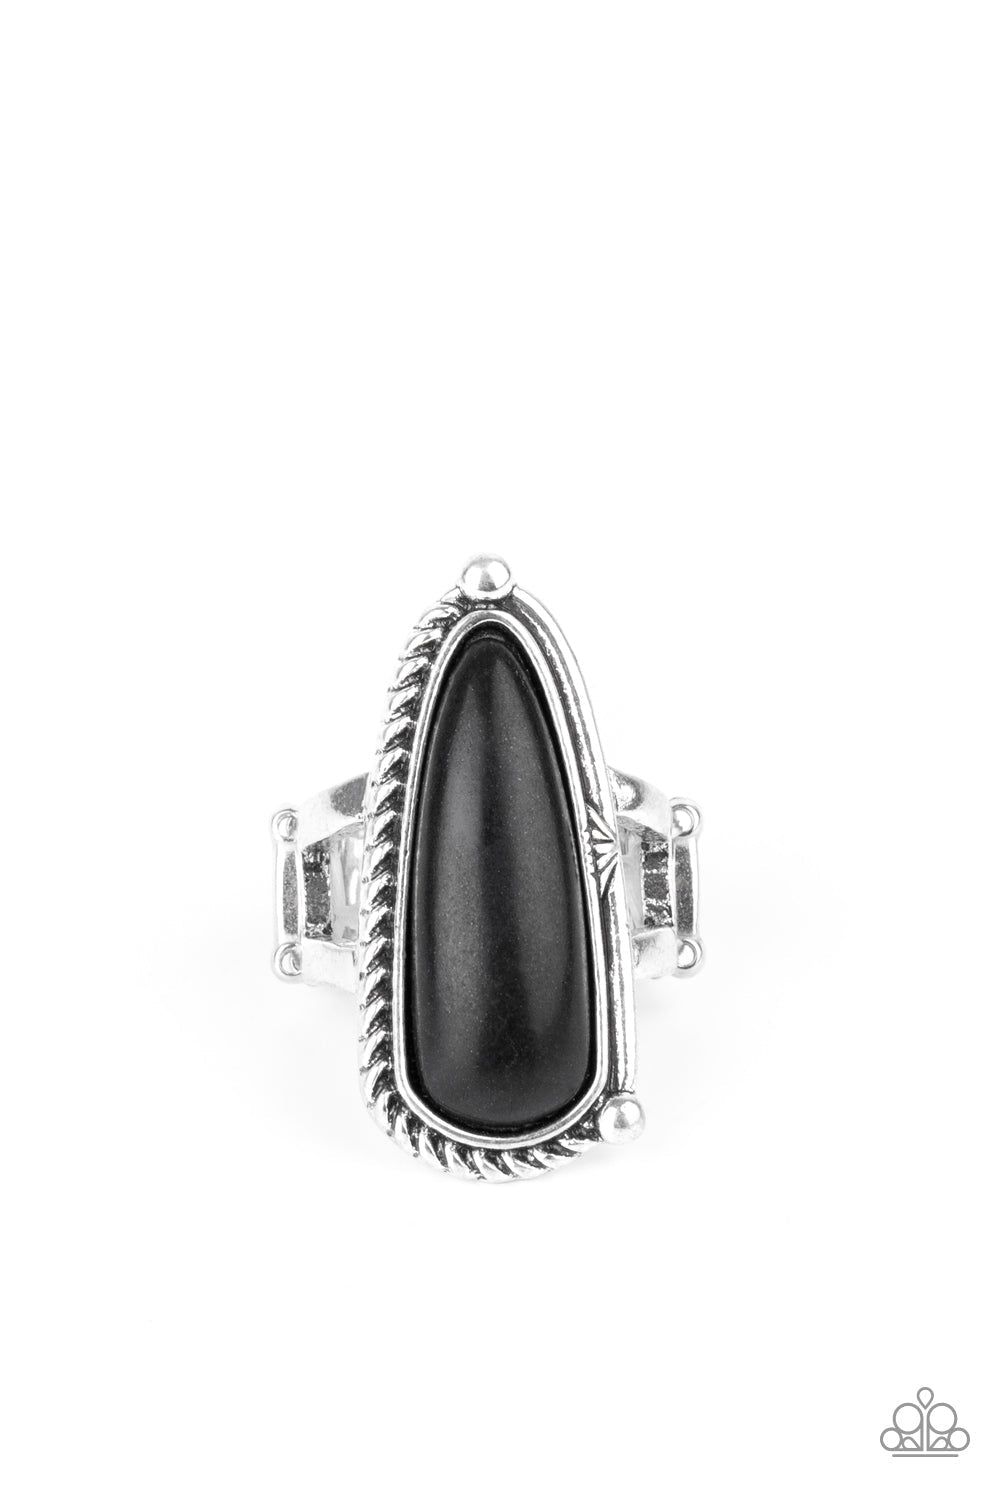 Pioneer Plains - Black and Silver Ring - Paparazzi Jewelry - Bejeweled Accessories By Kristie - Chiseled into an oblong teardrop shape, an earthy black stone is pressed into an asymmetrically patterned silver frame for an artisan inspired look. Features a stretchy band for a flexible fit. Sold as one individual ring.